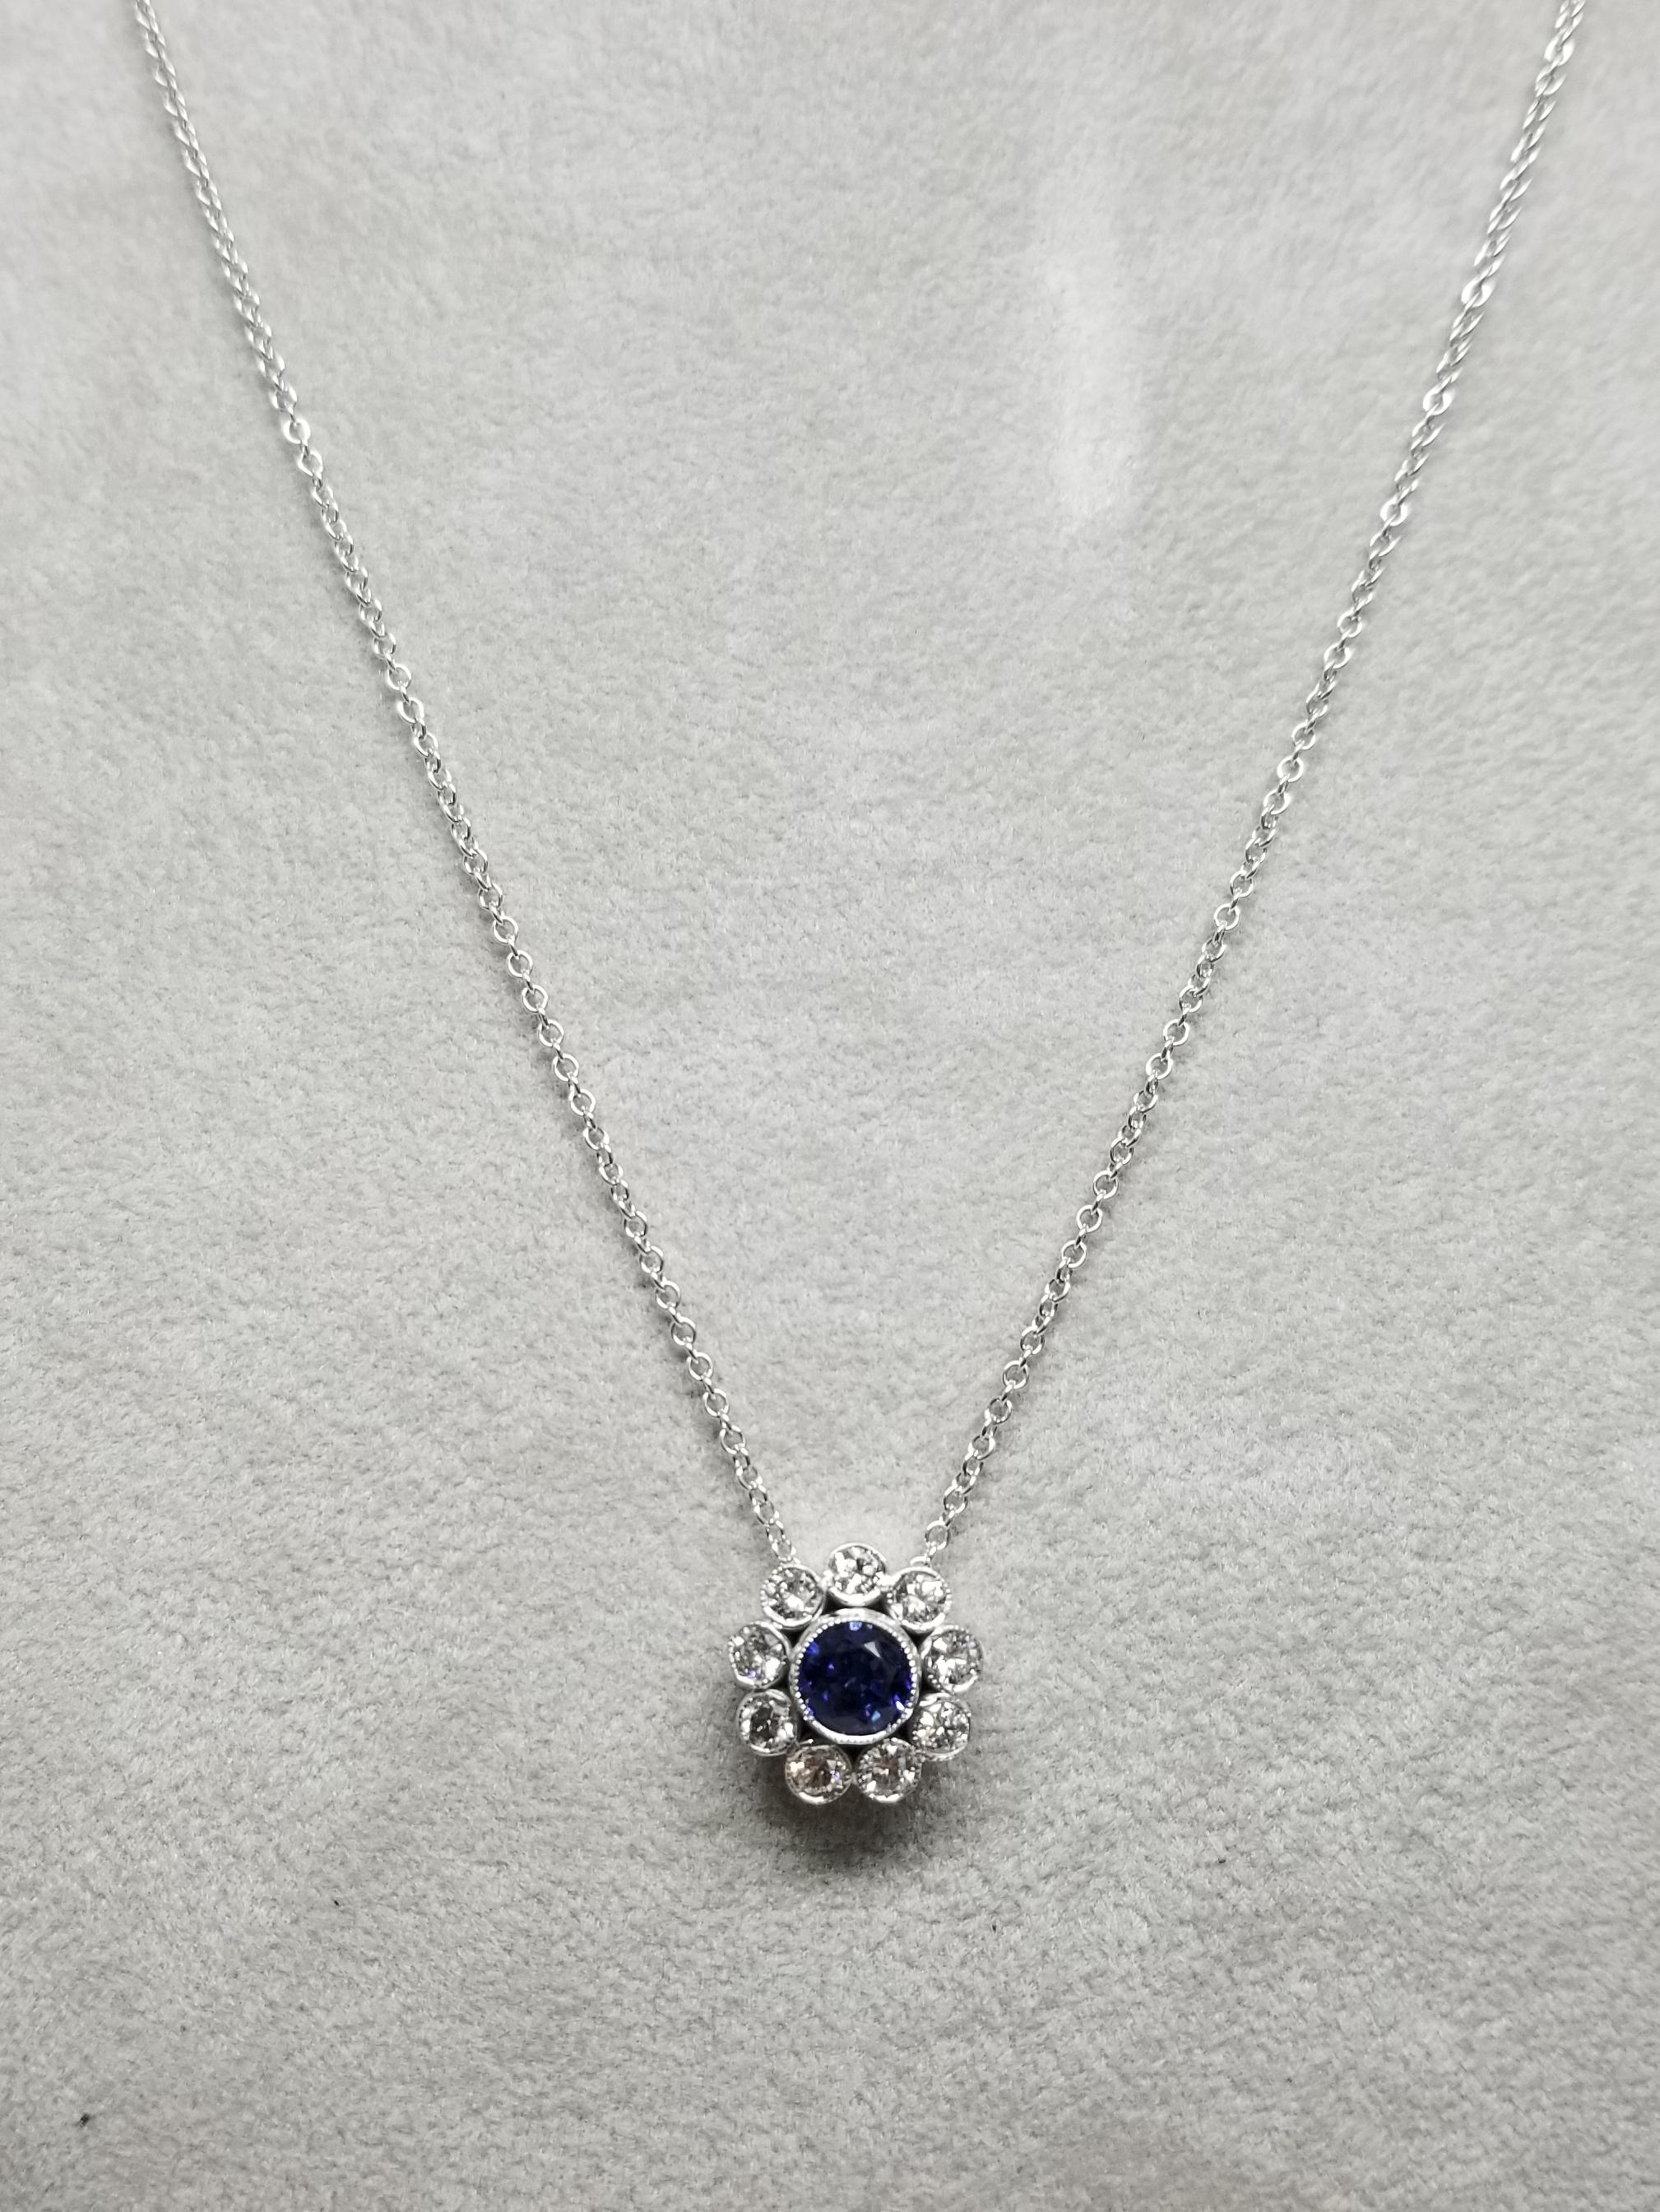 14 karat Sapphire and diamond halo pendant, containing 1 round blue sapphire of gem quality weighing 1.11cts. and 9 round full cut diamonds of very fine quality weighing .80pts.